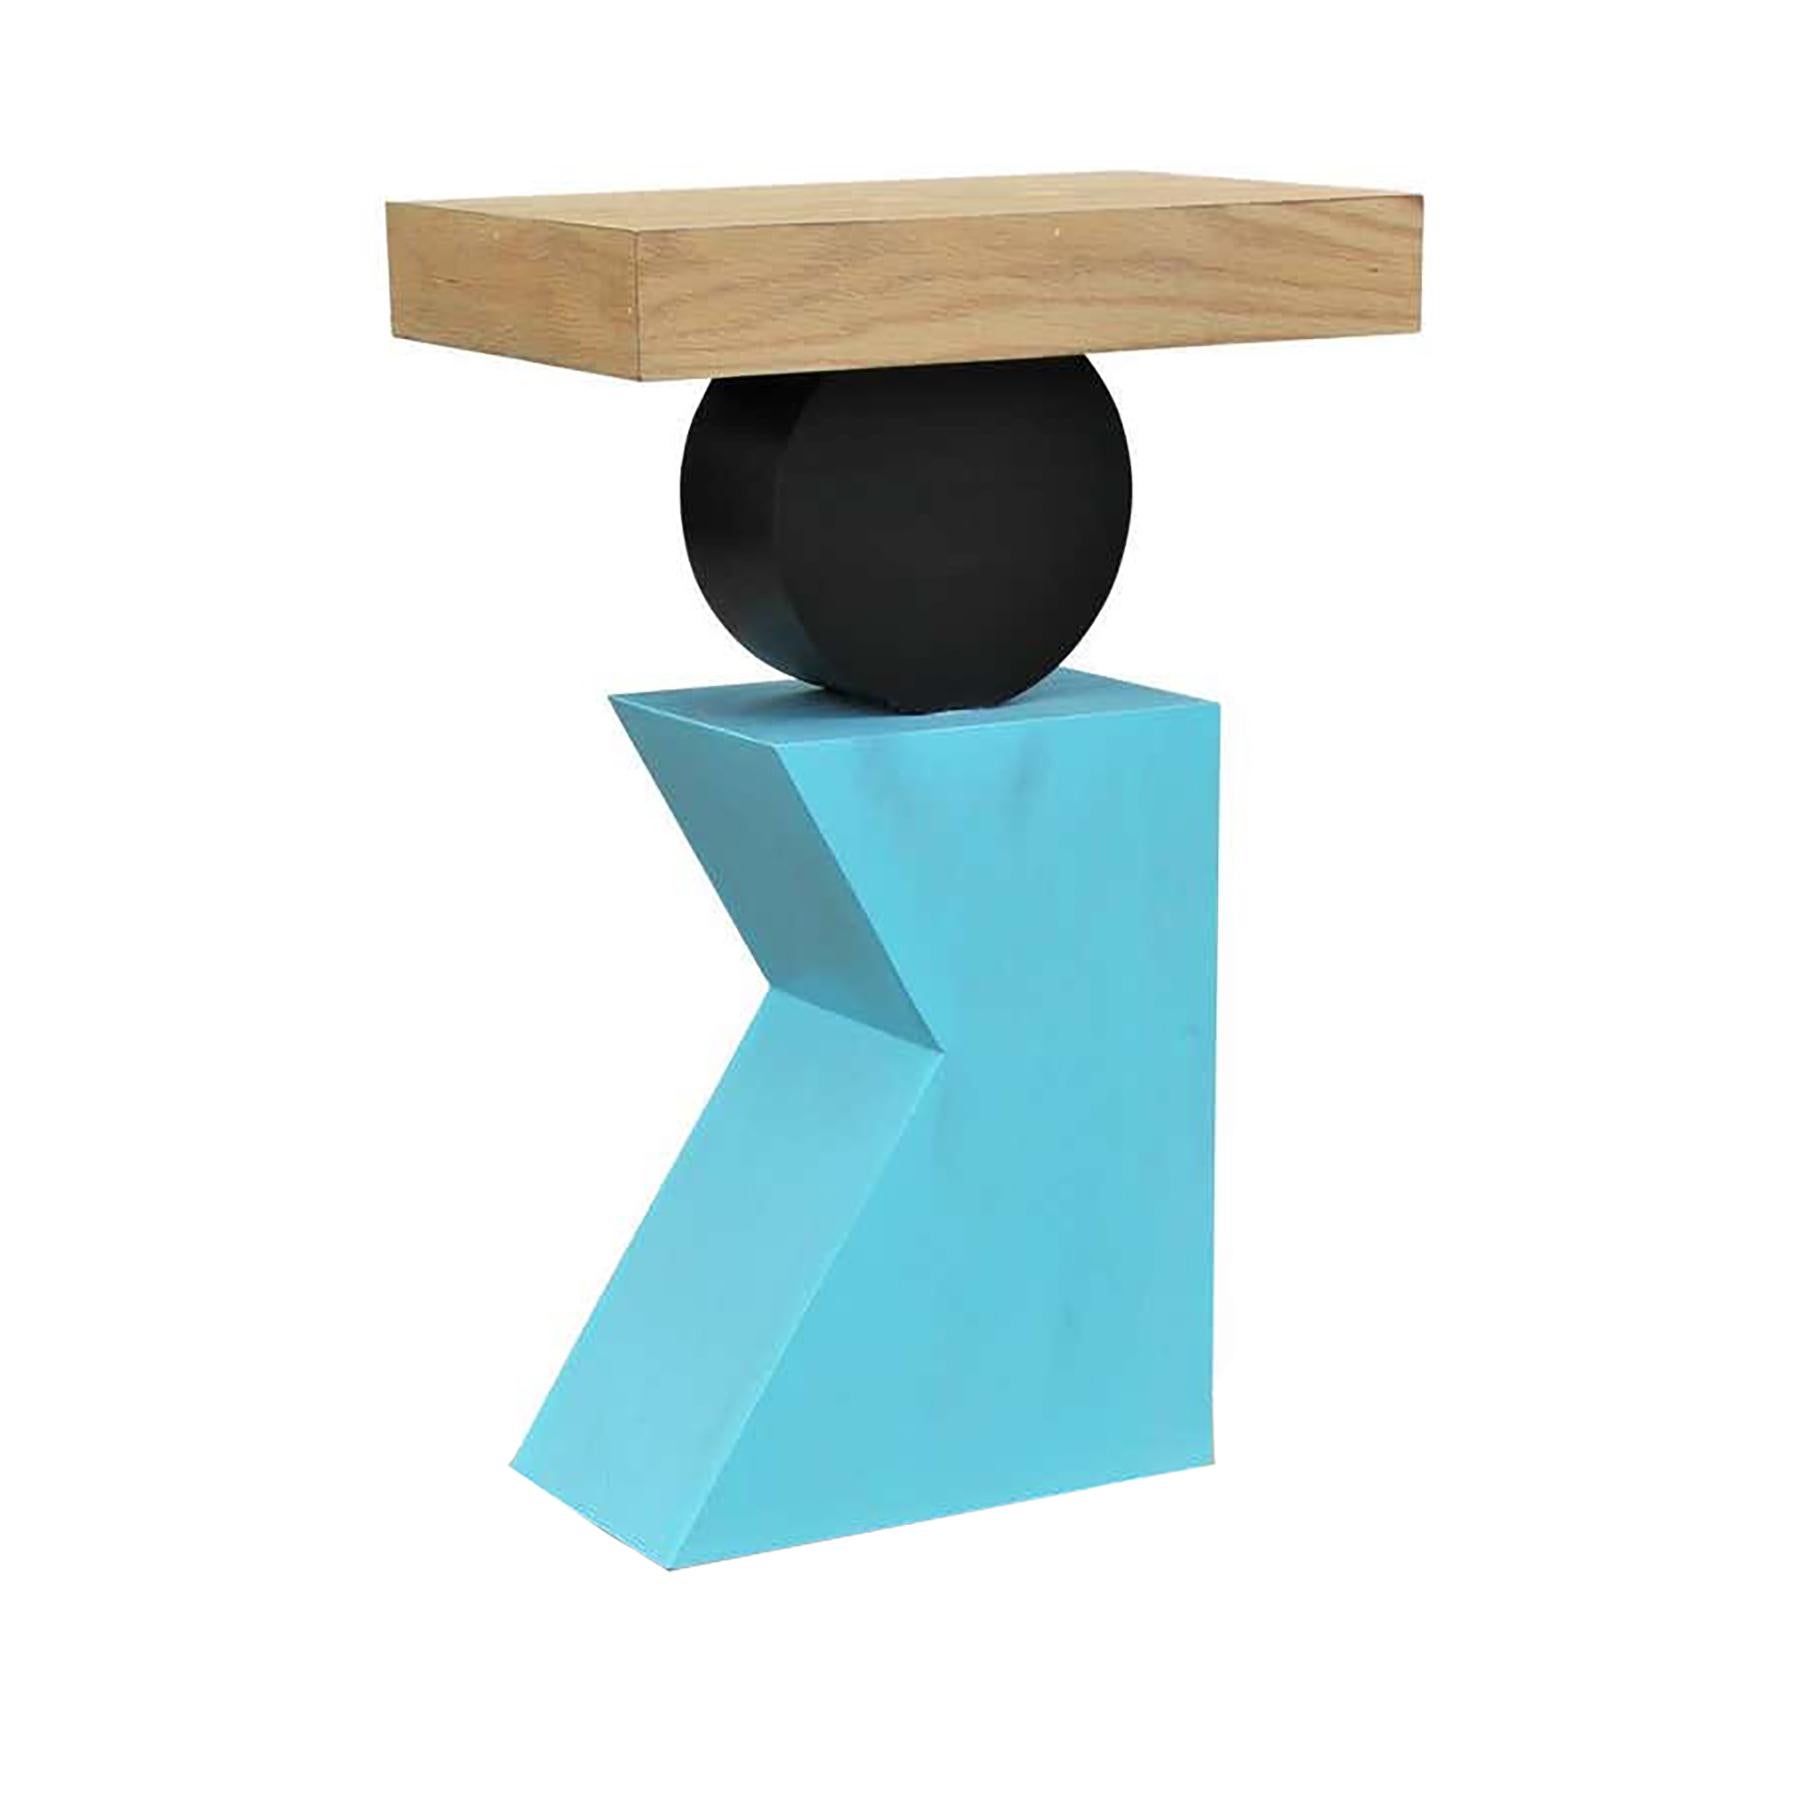 Custom post-modern geometric side table in blue, black, and natural. The one pictured are available for immediate sale, but custom made to order options are available.